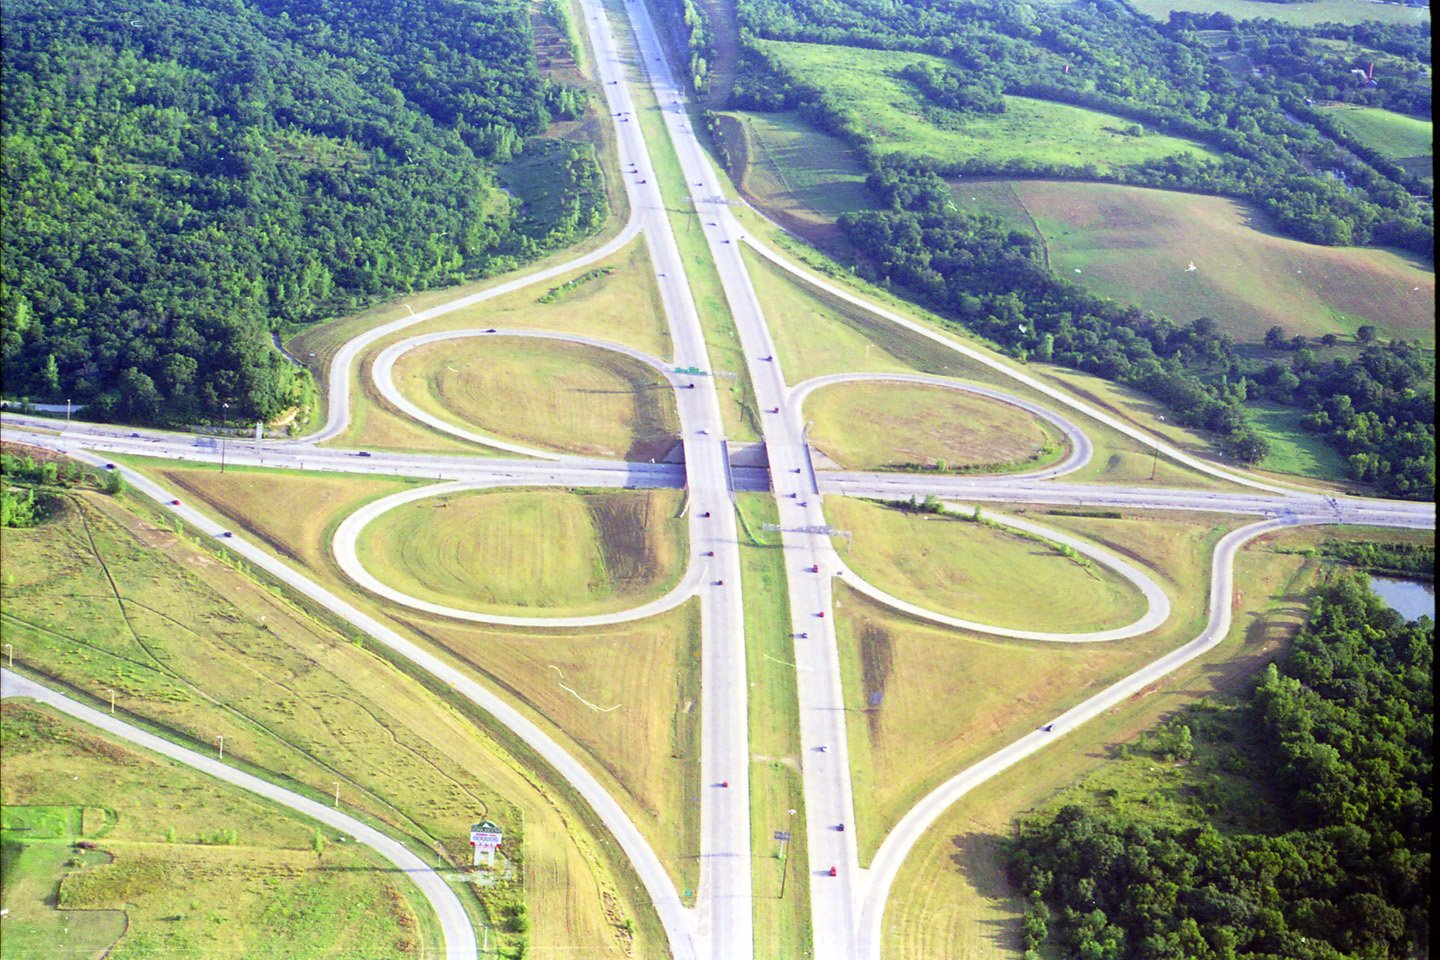 an overhead view of multiple roads intersecting